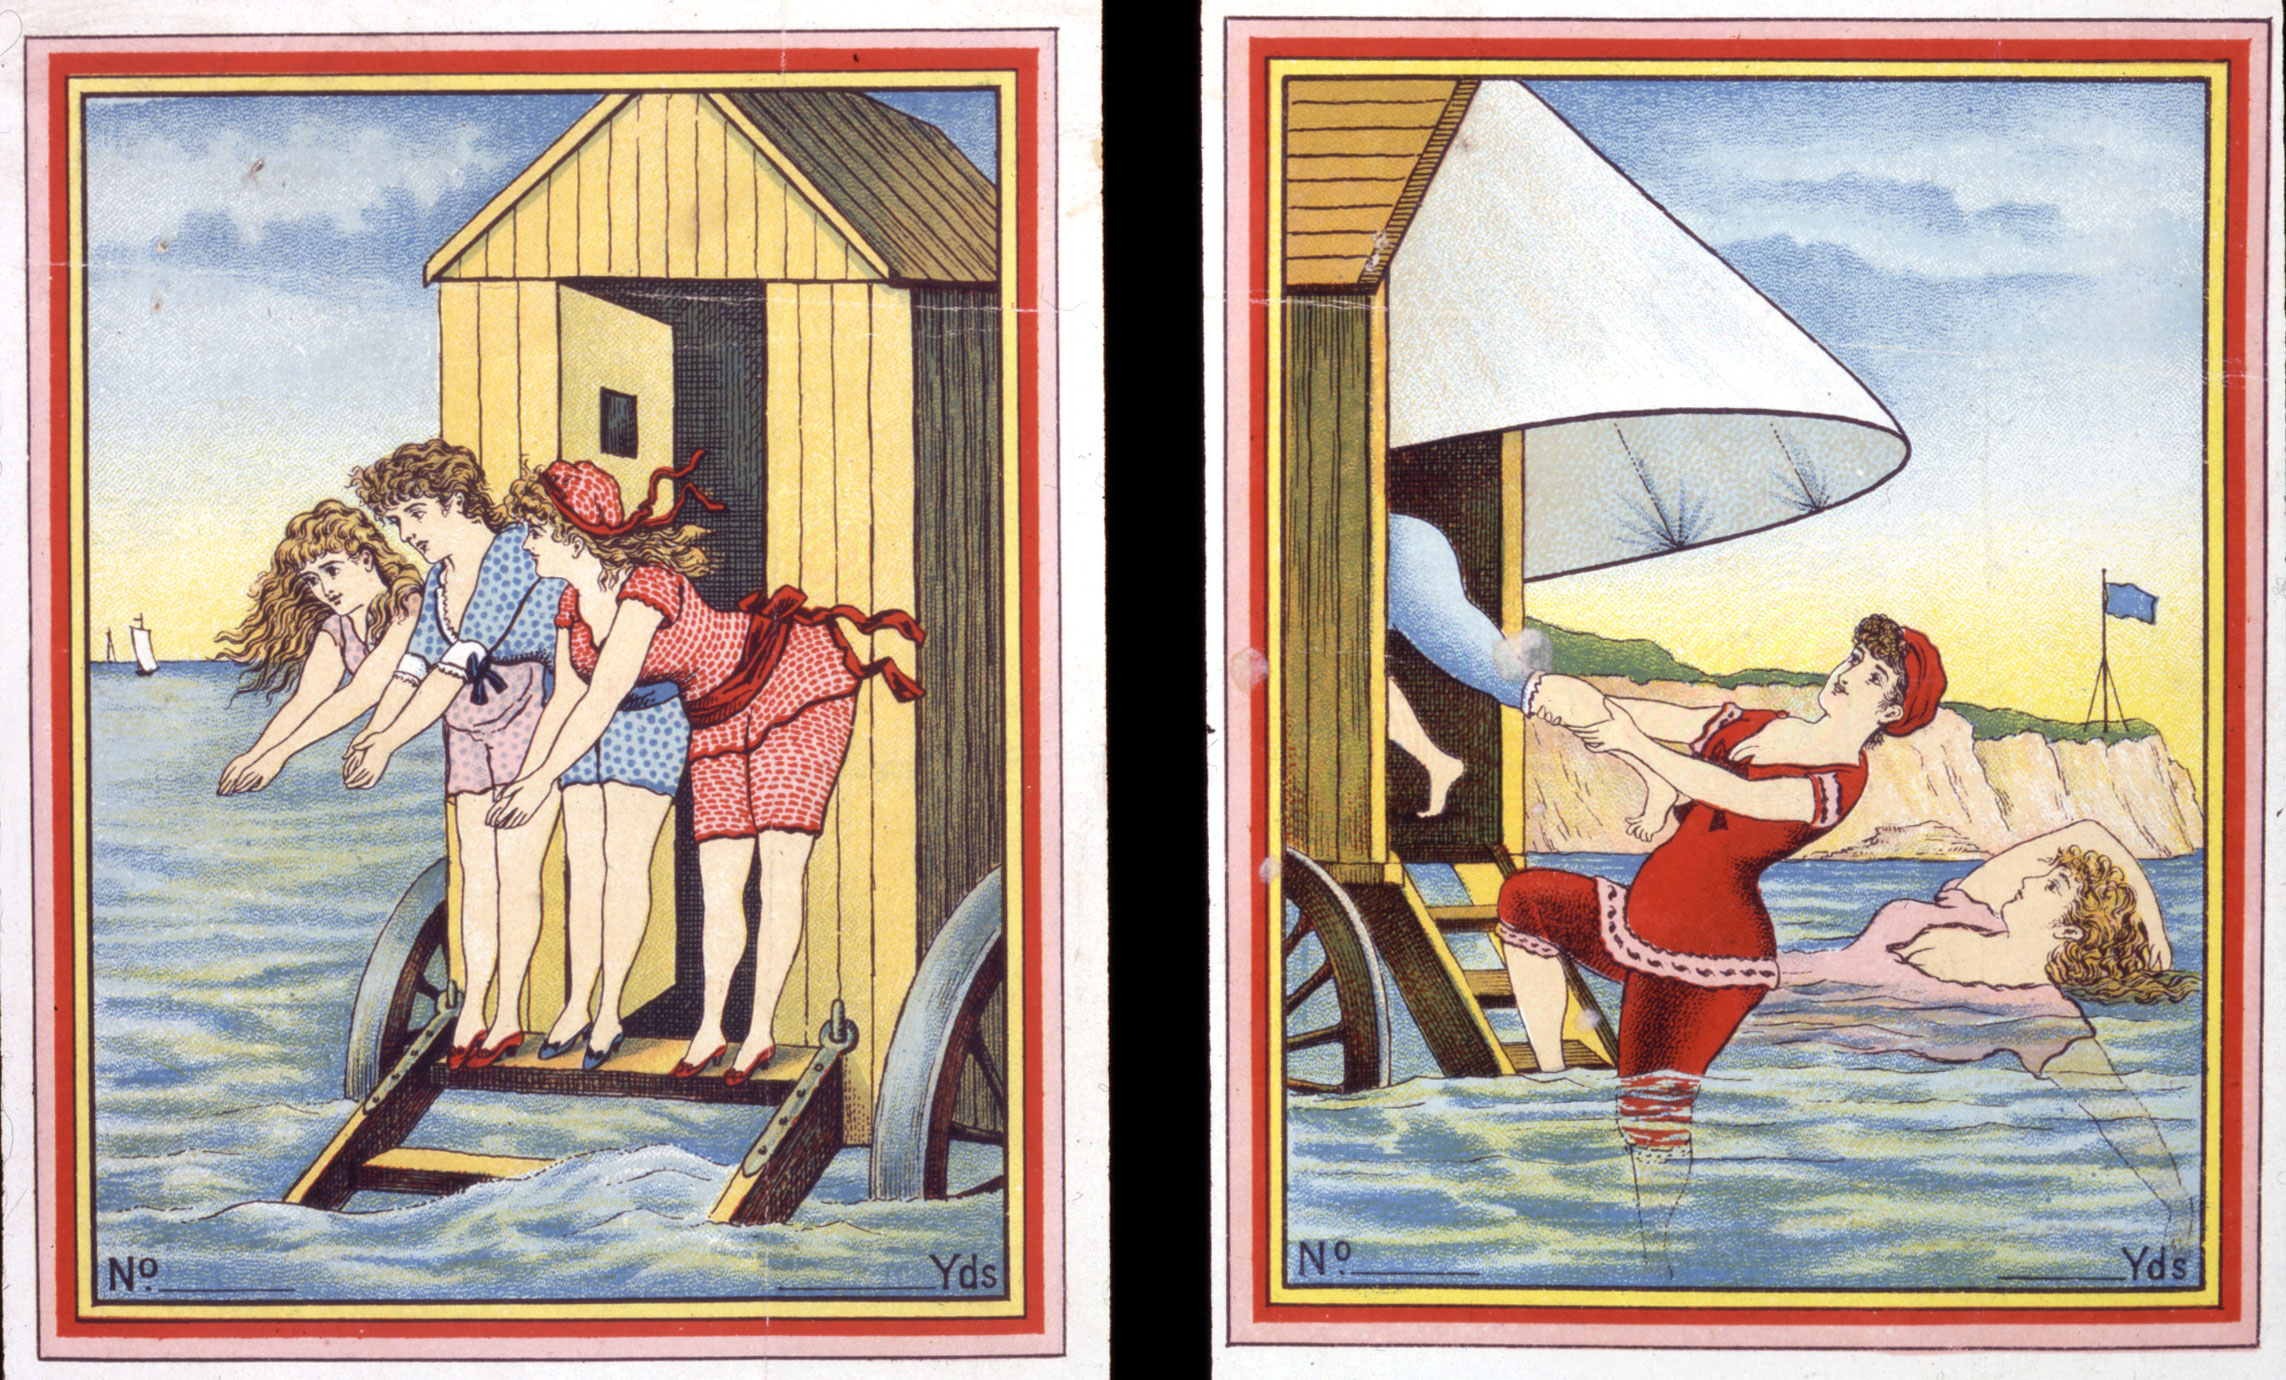 Two illustrations, one showing three women about to dive into the water from a wooden cart, and the other showing a woman in the water holding onto another woman’s leg that sticks out from a cart. Another woman behind her floats in the water.